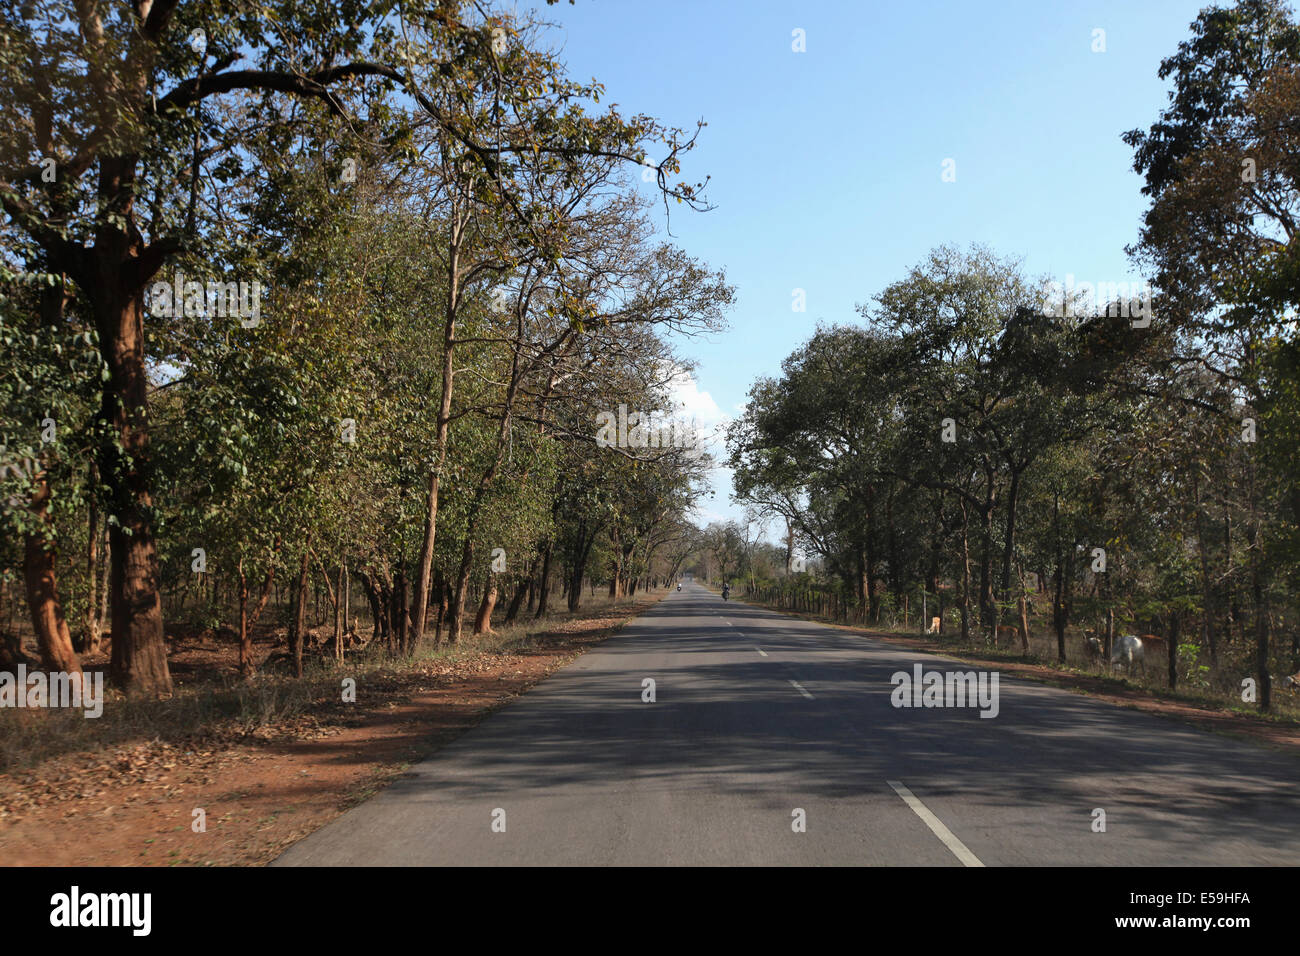 Road to tribal village through thick forest, Chattisgadh, India Stock Photo